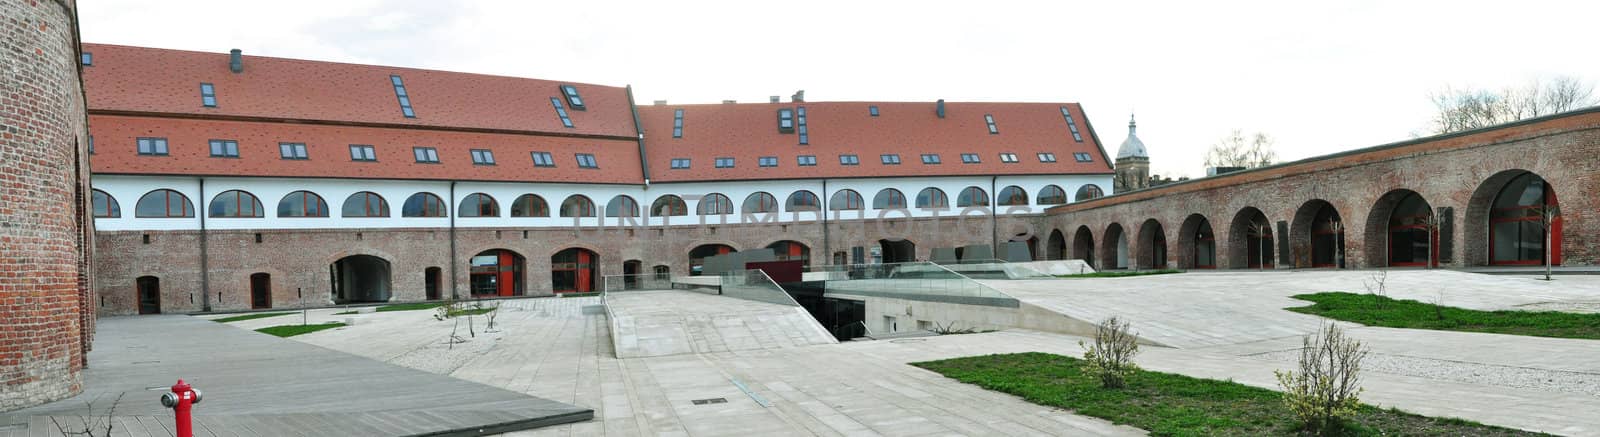 panorama image of timisoara bastion historic building in spring